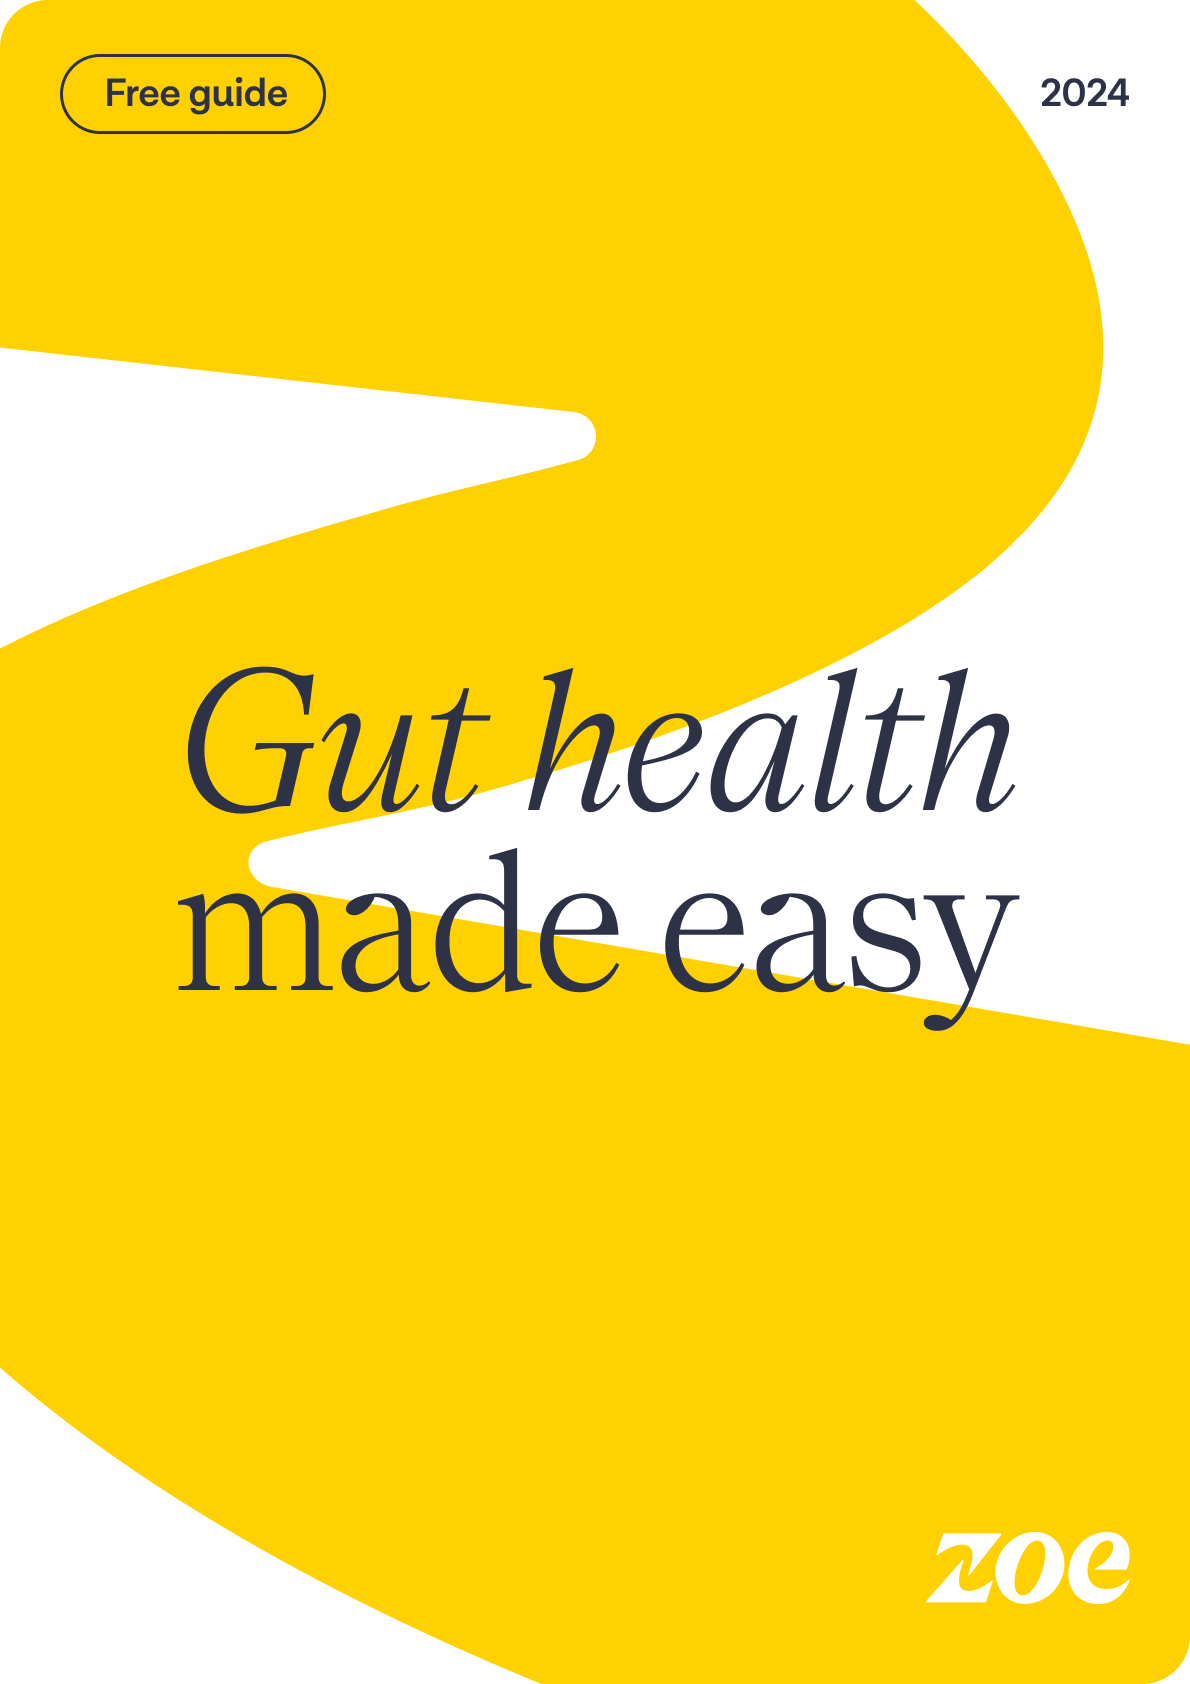 Gut health made easy. 5 simple steps to a healthier you.